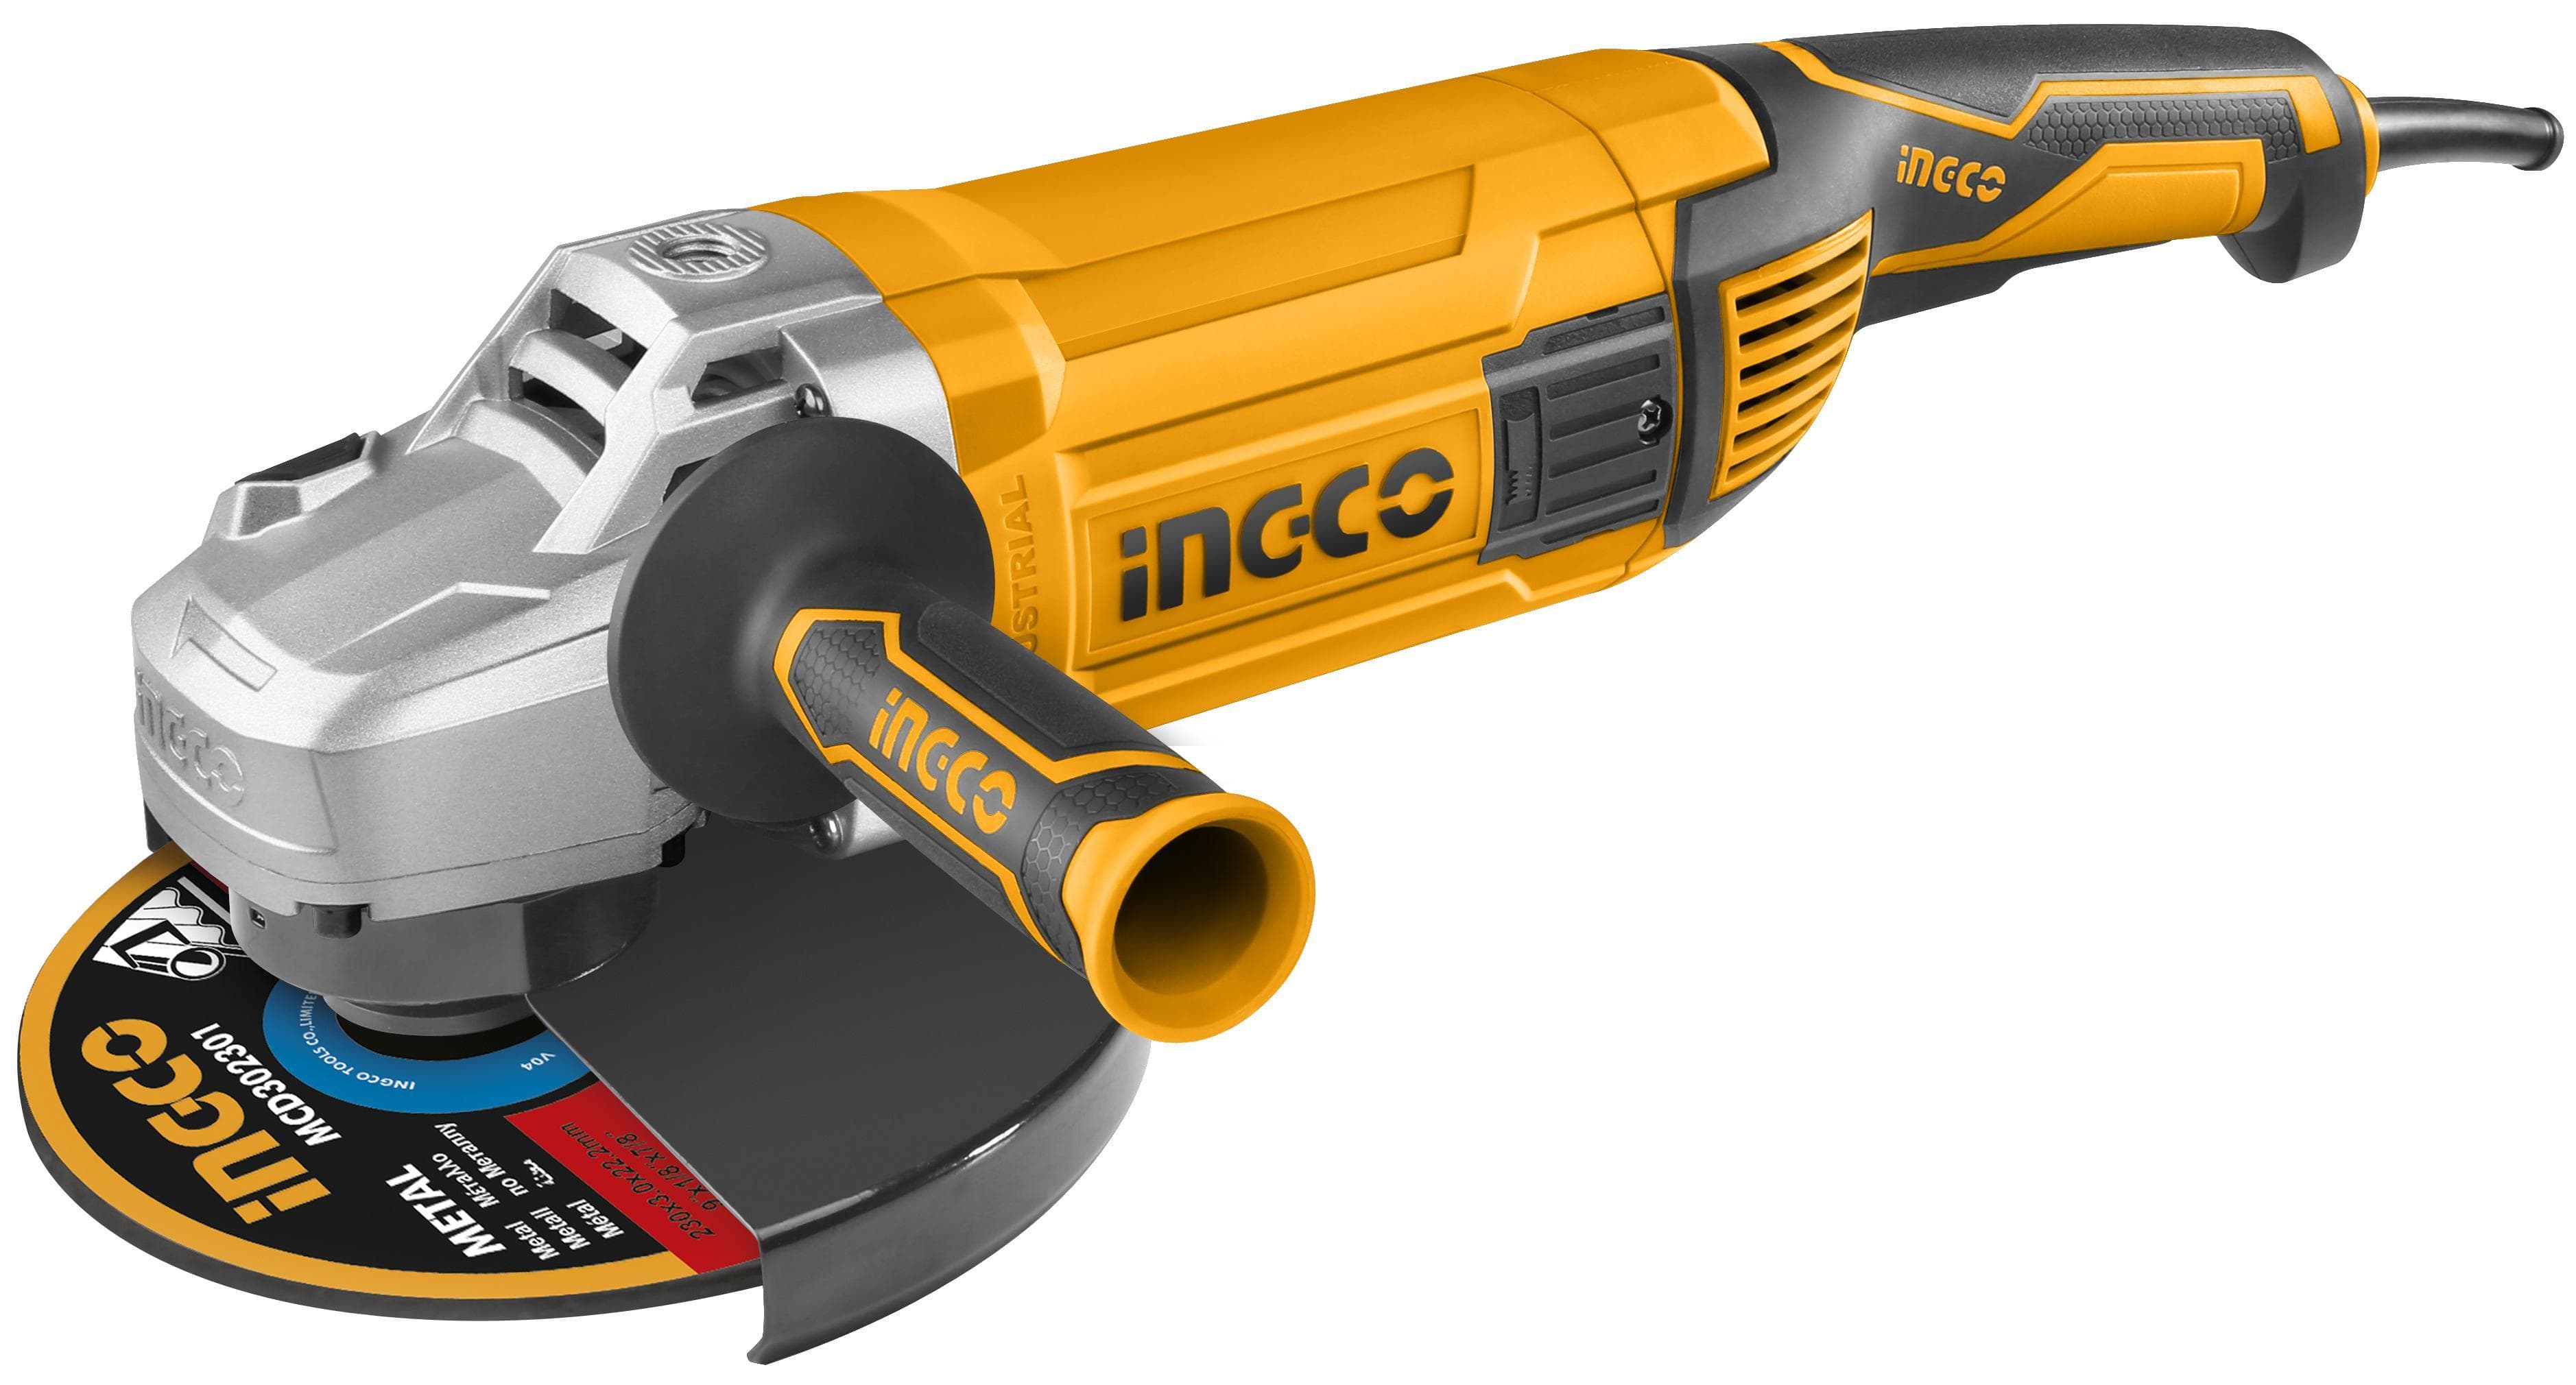 Ingco 9" Angle Grinder 2400W - AG24008 | Supply Master | Accra, Ghana Tools Building Steel Engineering Hardware tool